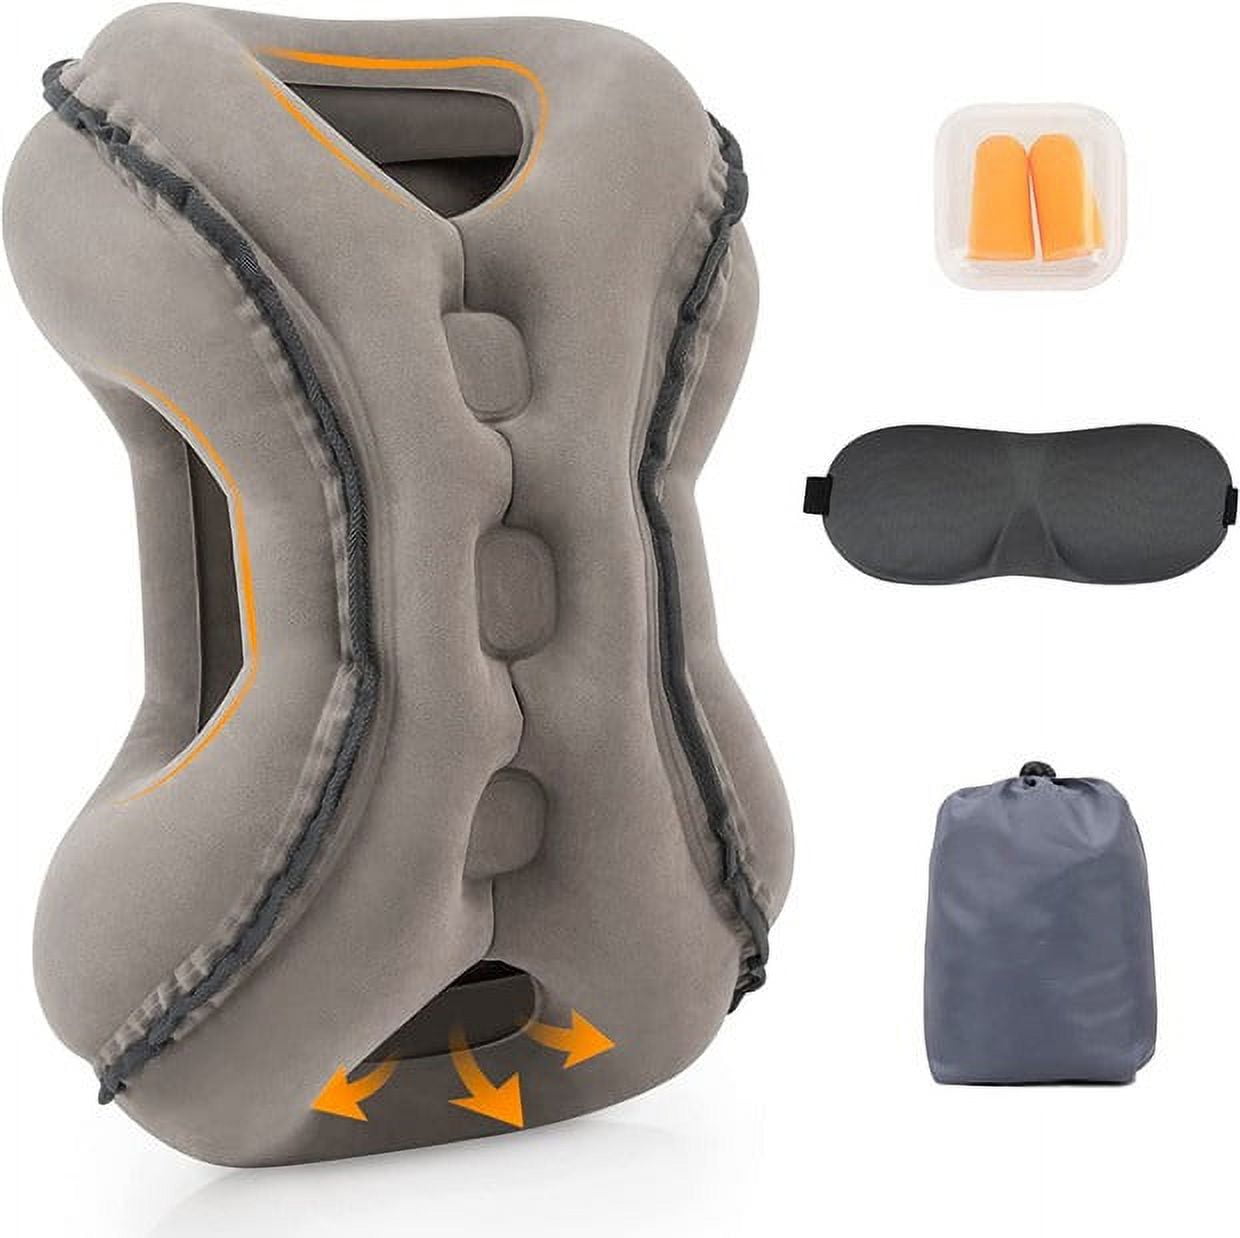 Medic Air Inflatable Support Pillows - North Coast Medical